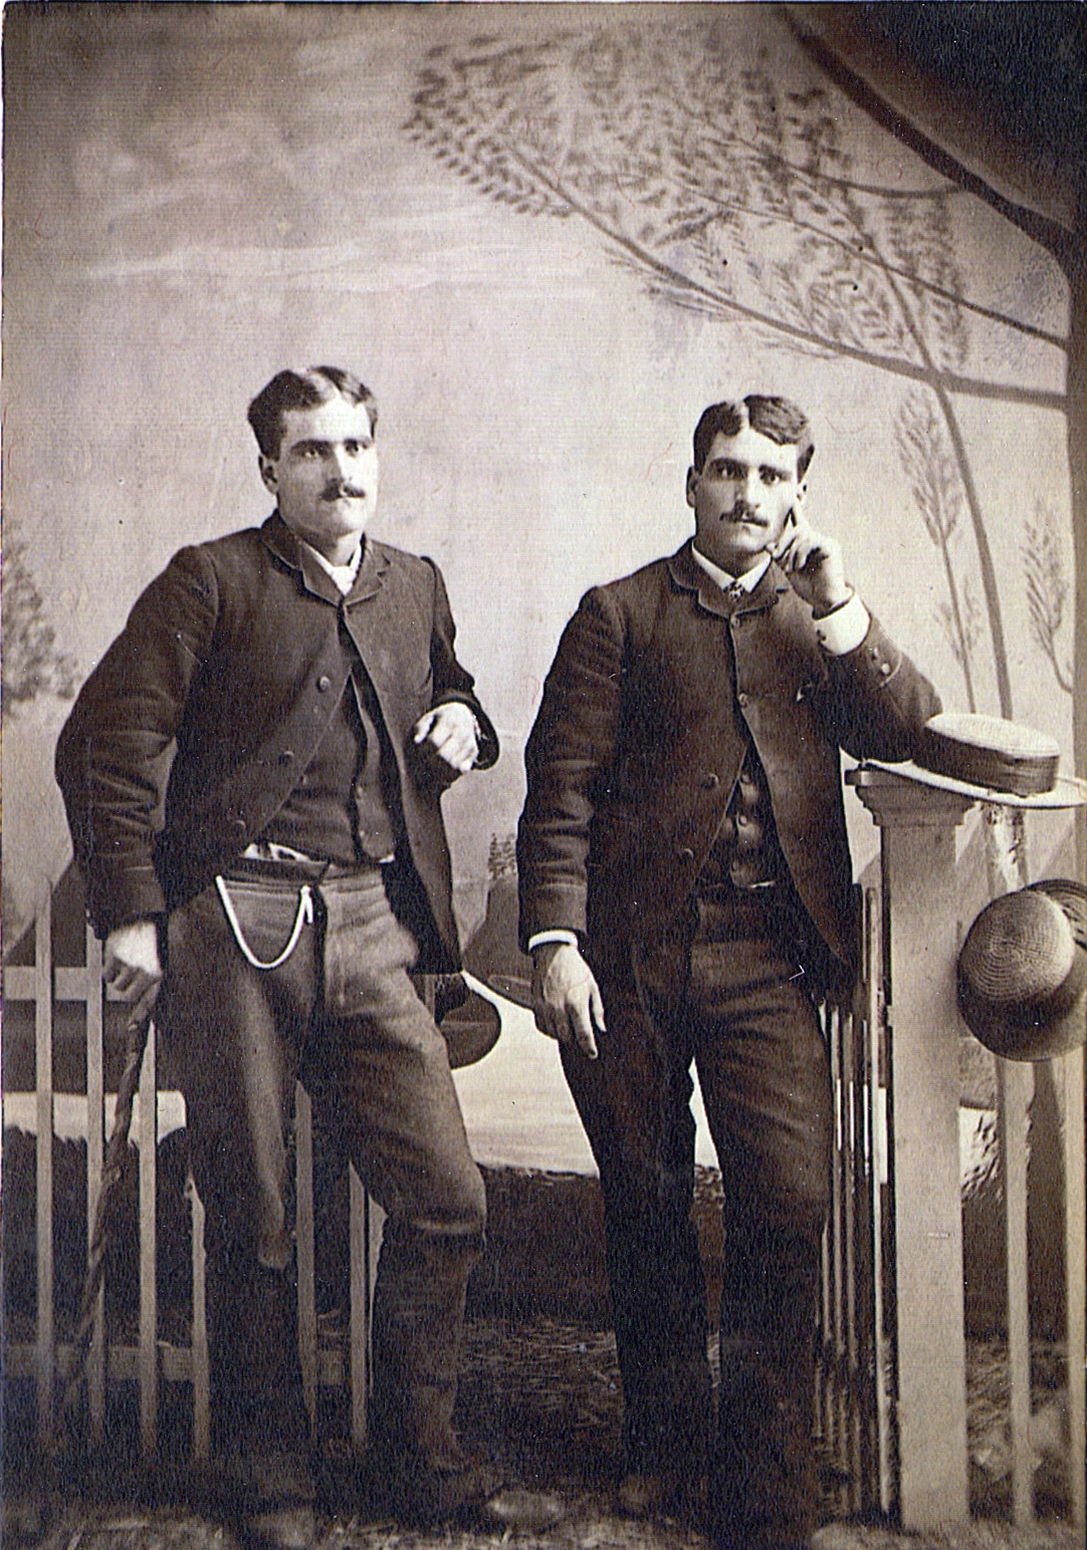 Jerry and George Keeney